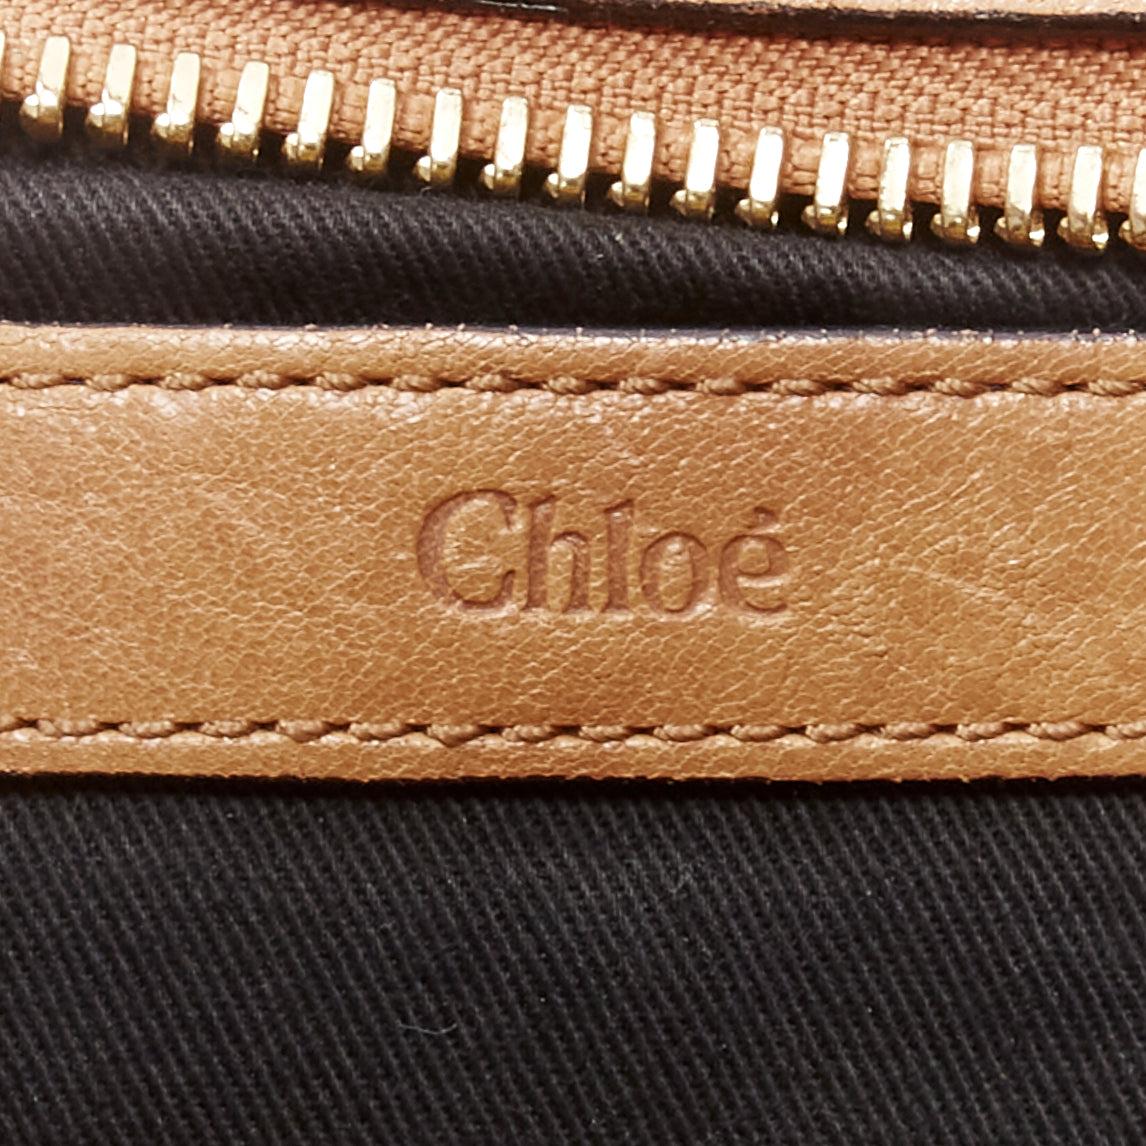 CHLOE Ethel tan smooth leather gold logo square buckles small shoulder bag For Sale 6